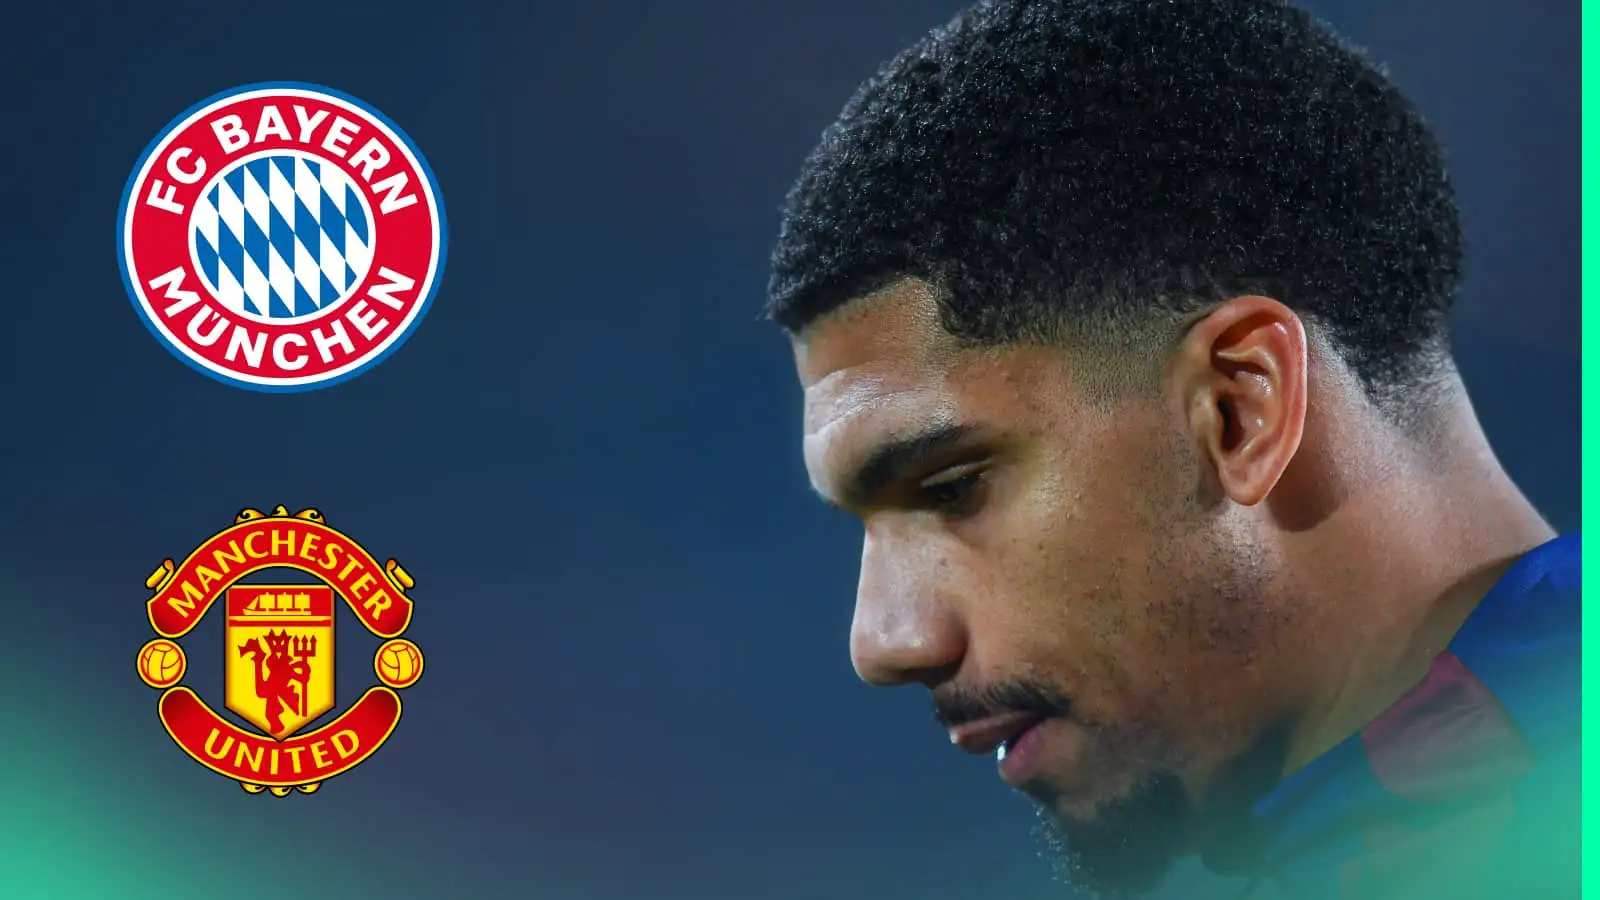 Ronald Araujo and the badges of Bayern Munich and Manchester United